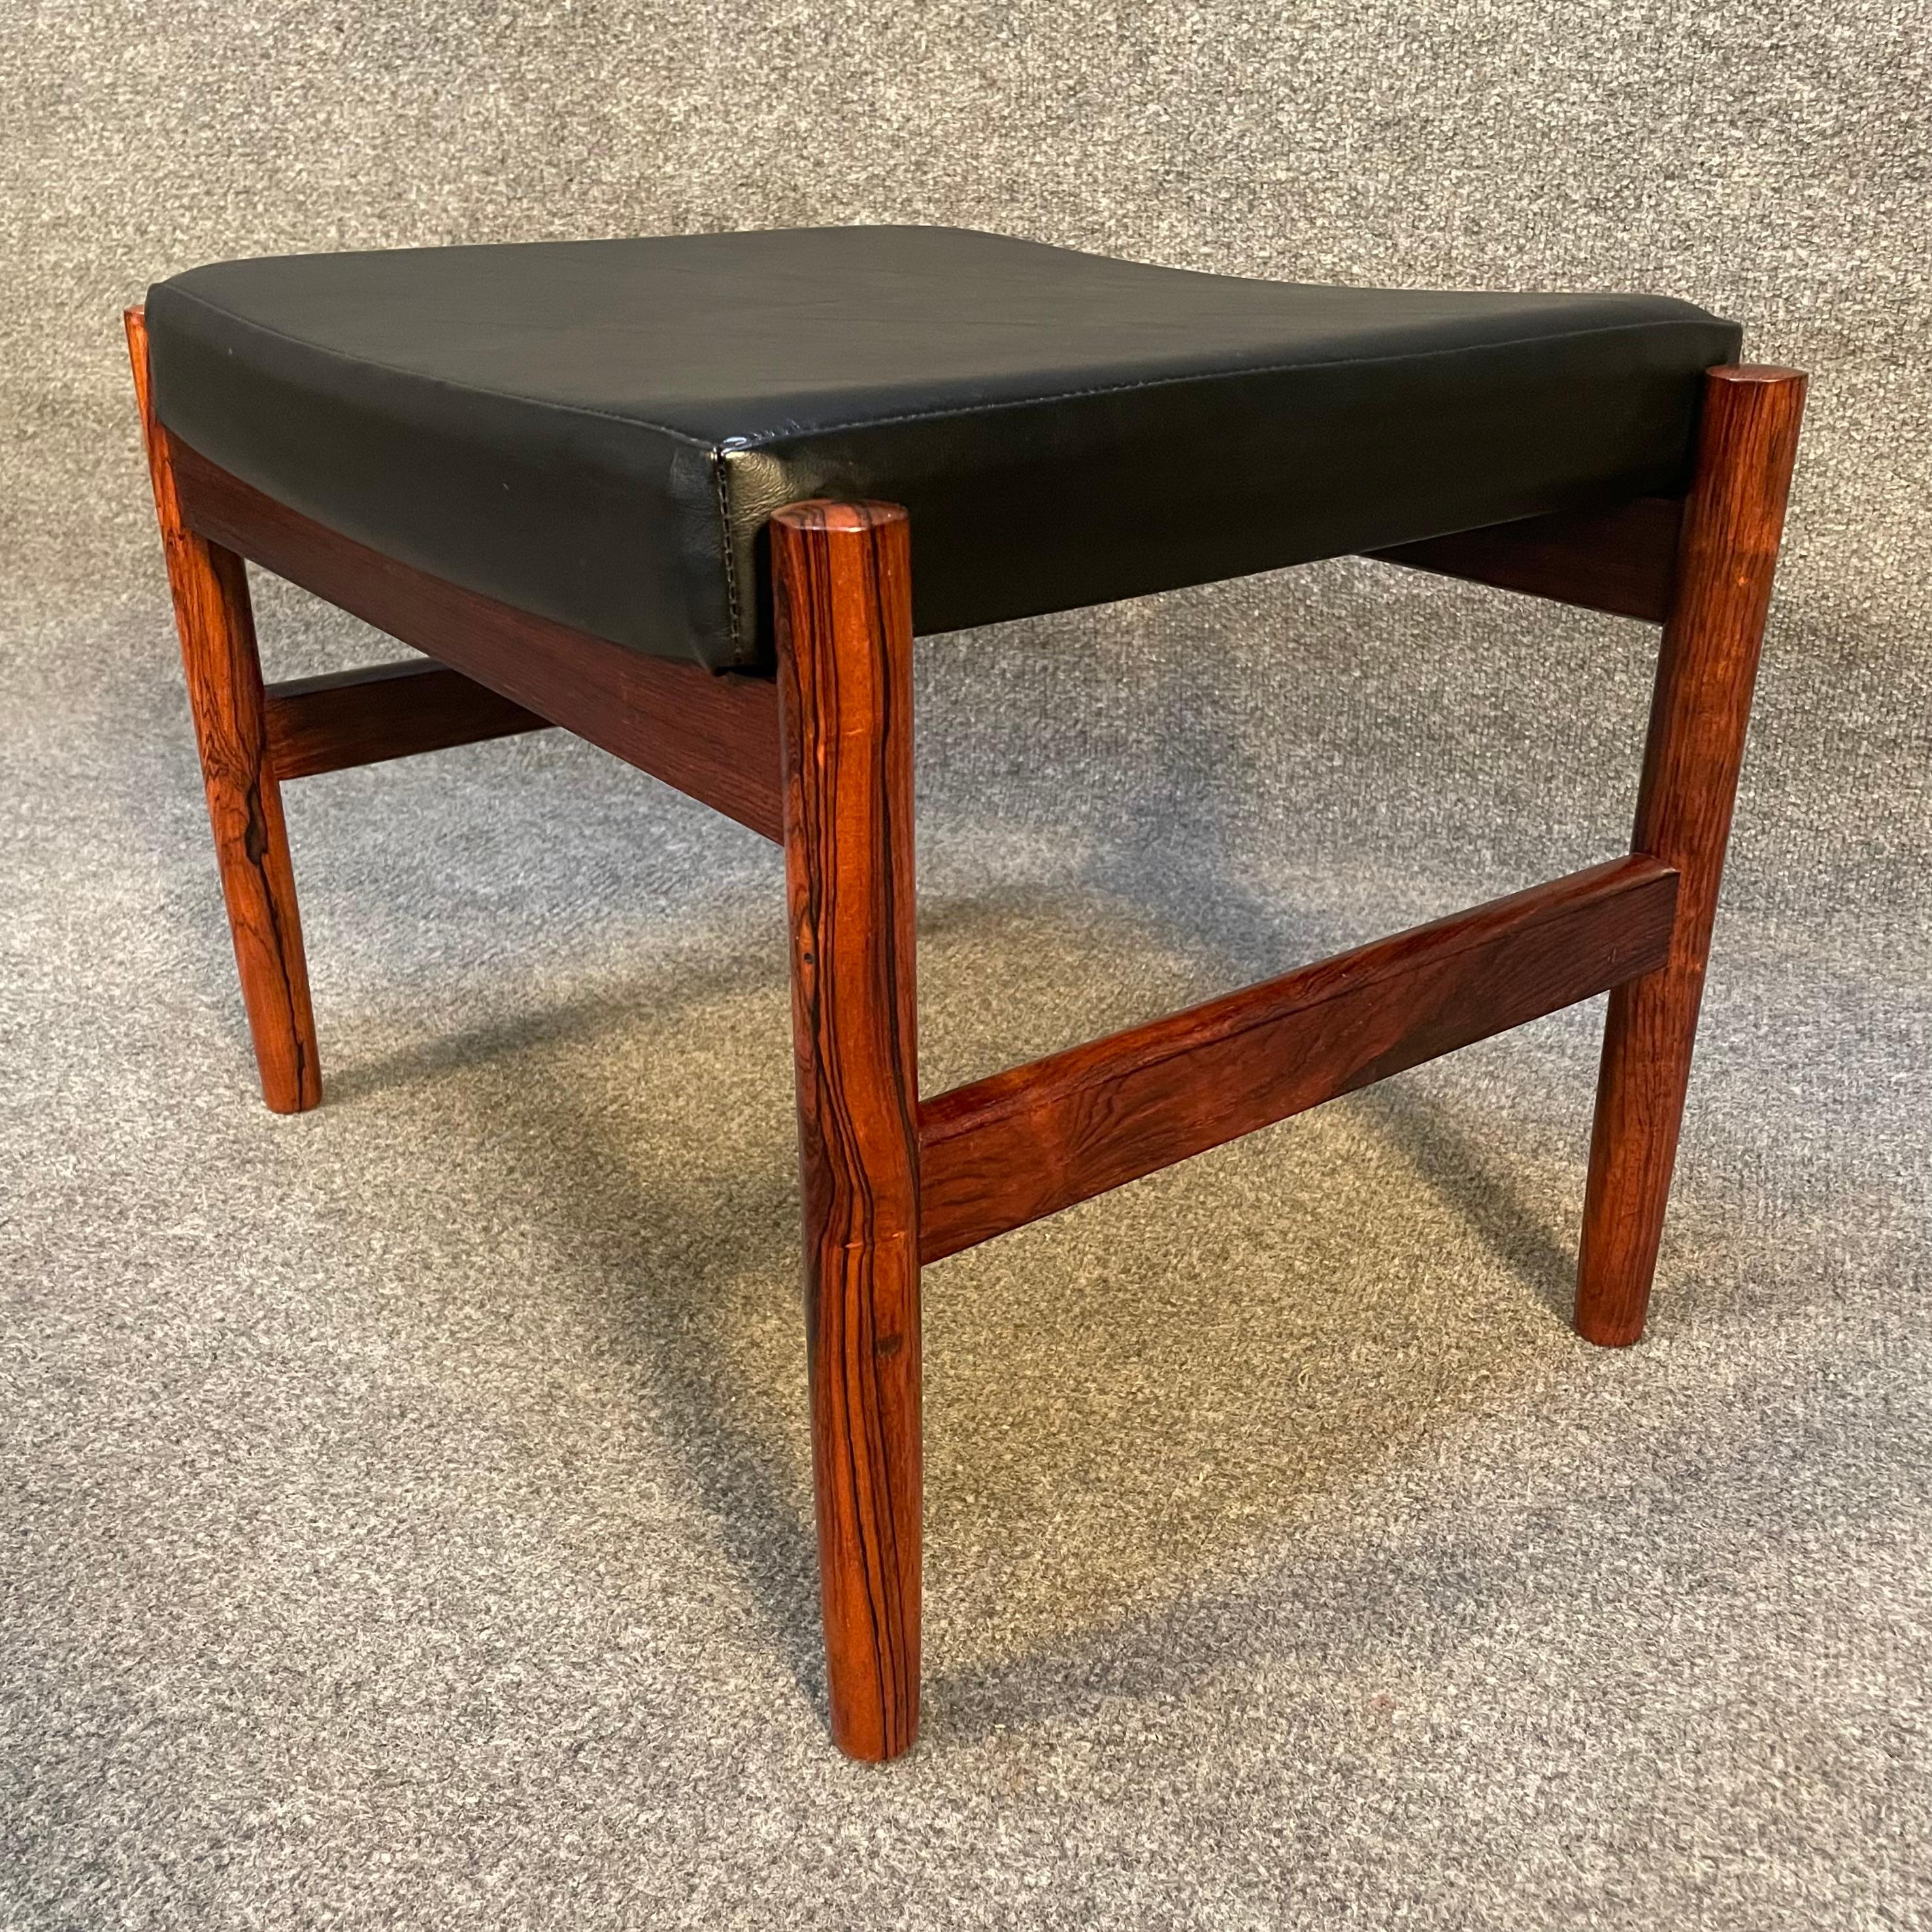 Here is a beautiful scandinavian modern footstool in rosewood manufactured by Spottrup in Denmark in the 1960's.
This exquisite ottoman, recently imported from Europe to California before its refinishing, features a solid rosewood frame and a seat